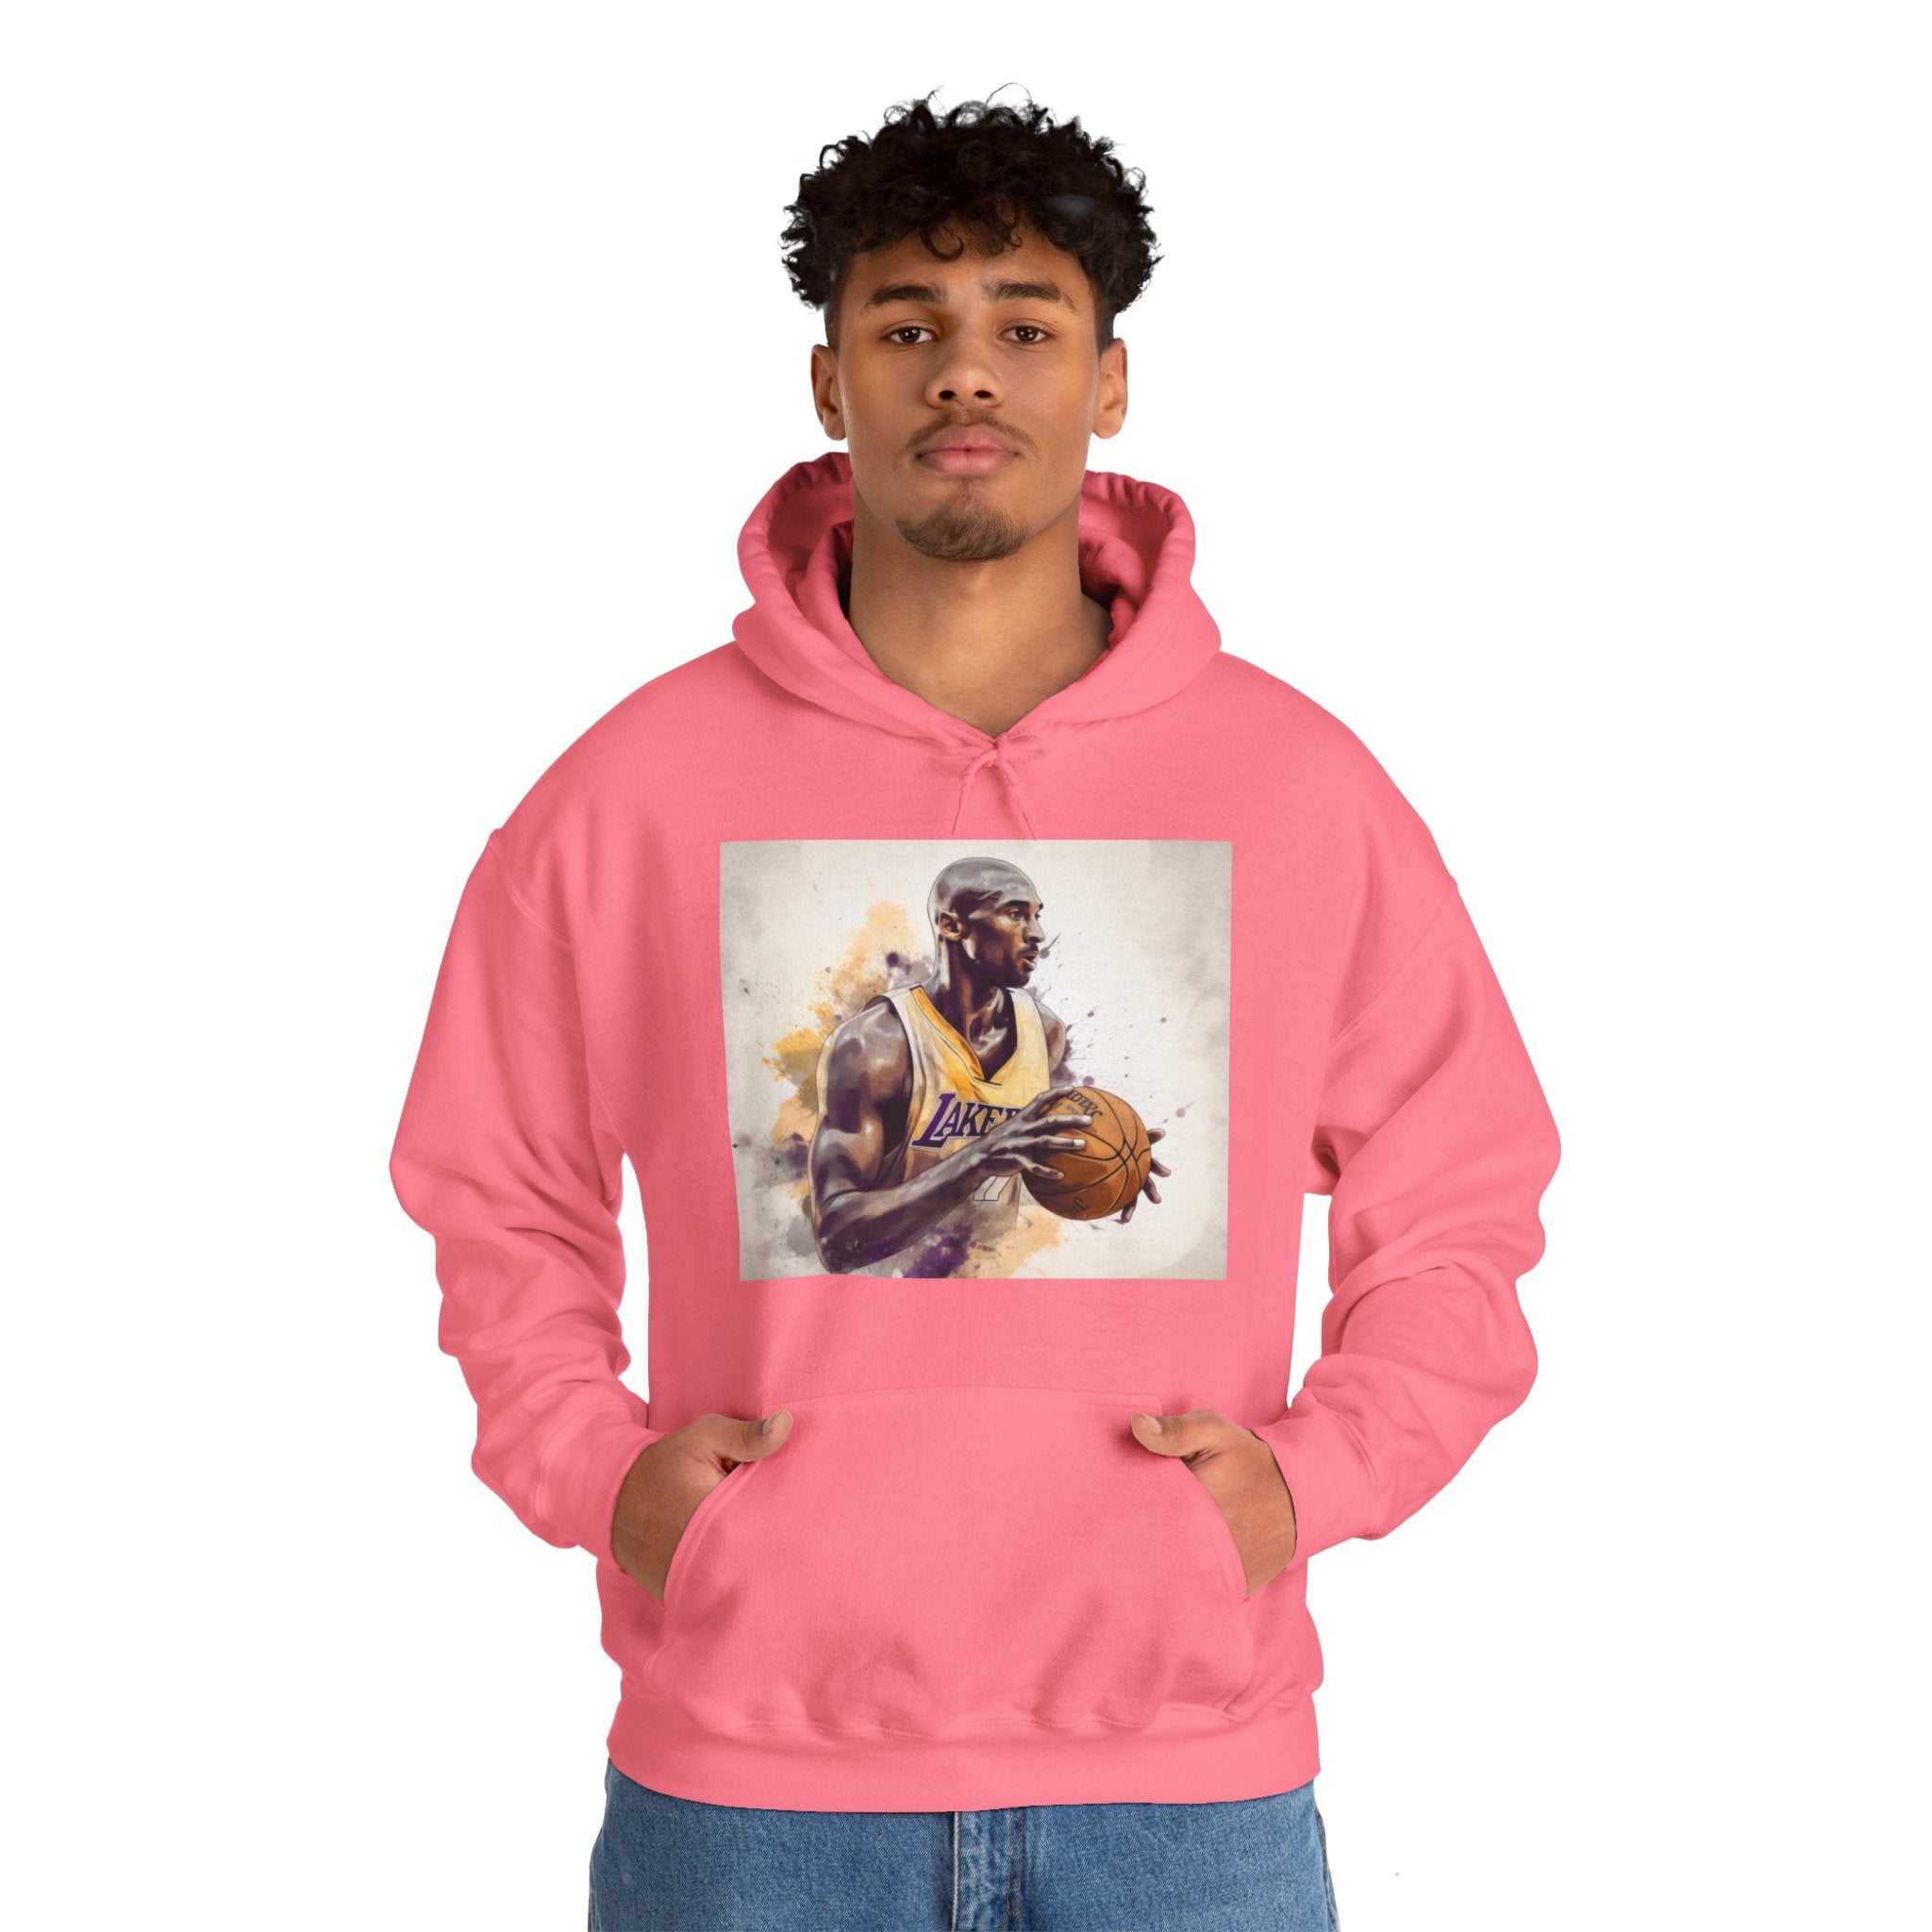 Imagine a hoodie that combines the intensity of a thunderstorm with the legendary Black Mamba. The front is adorned with striking lightning art, seamlessly blending with the iconic image of a mamba poised to strike. Its vibrant colors stand out against the hoodie's sleek black background, creating an electrifying visual effect.